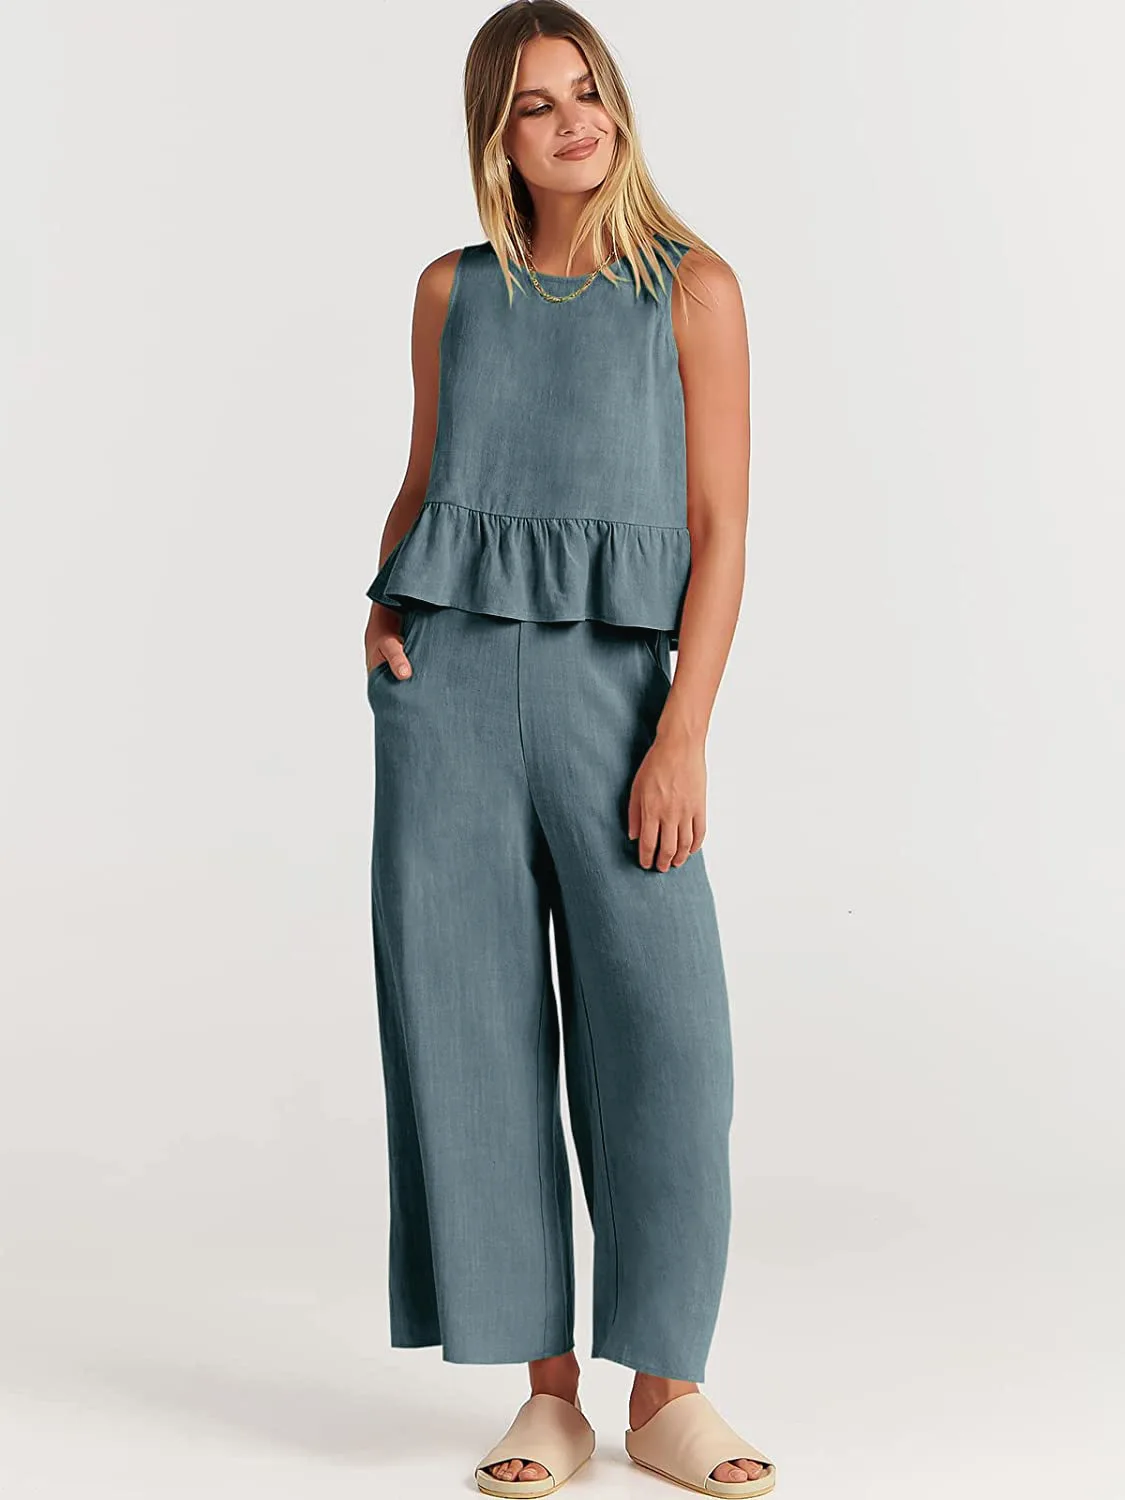 Women Summer Casual Linen 2 Piece Pants Set Solid Elegant Two Piece Suit Sleeveless Wide Leg Outfit 2023 New In Matcing Set -Sb28e8629cbb1409e9ee096441ee97790h